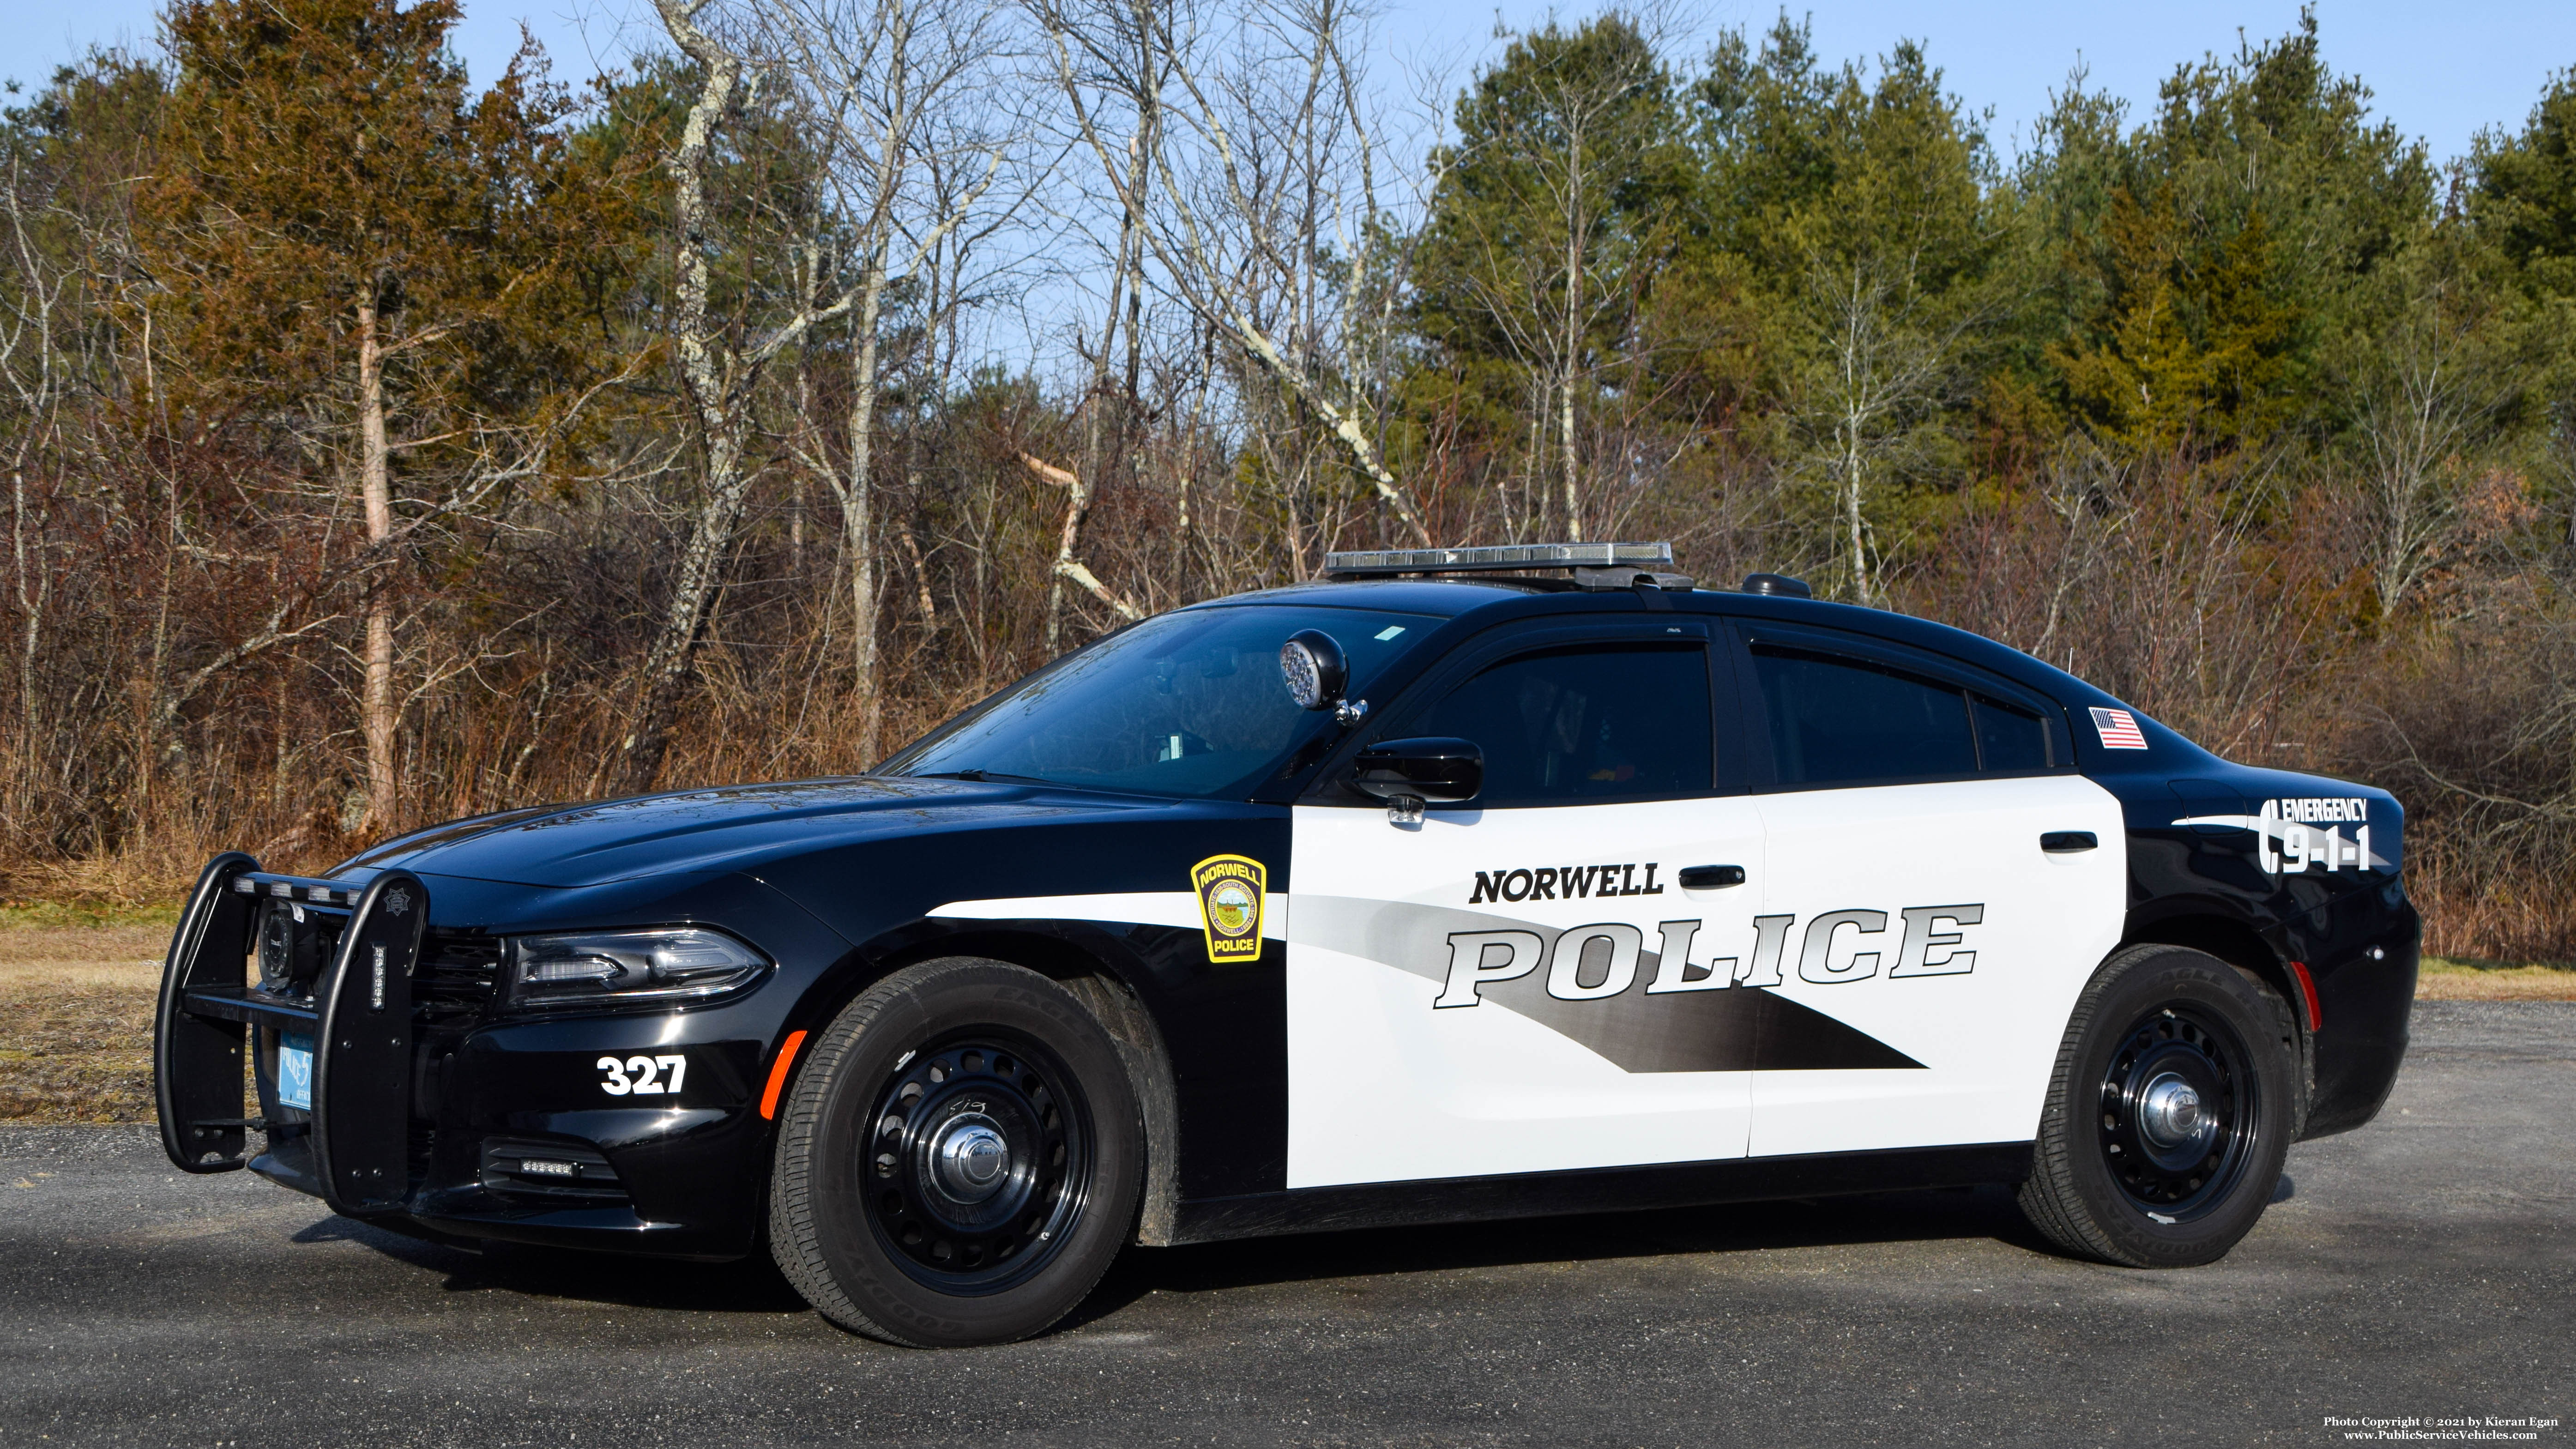 A photo  of Norwell Police
            Cruiser 327, a 2019 Dodge Charger             taken by Kieran Egan